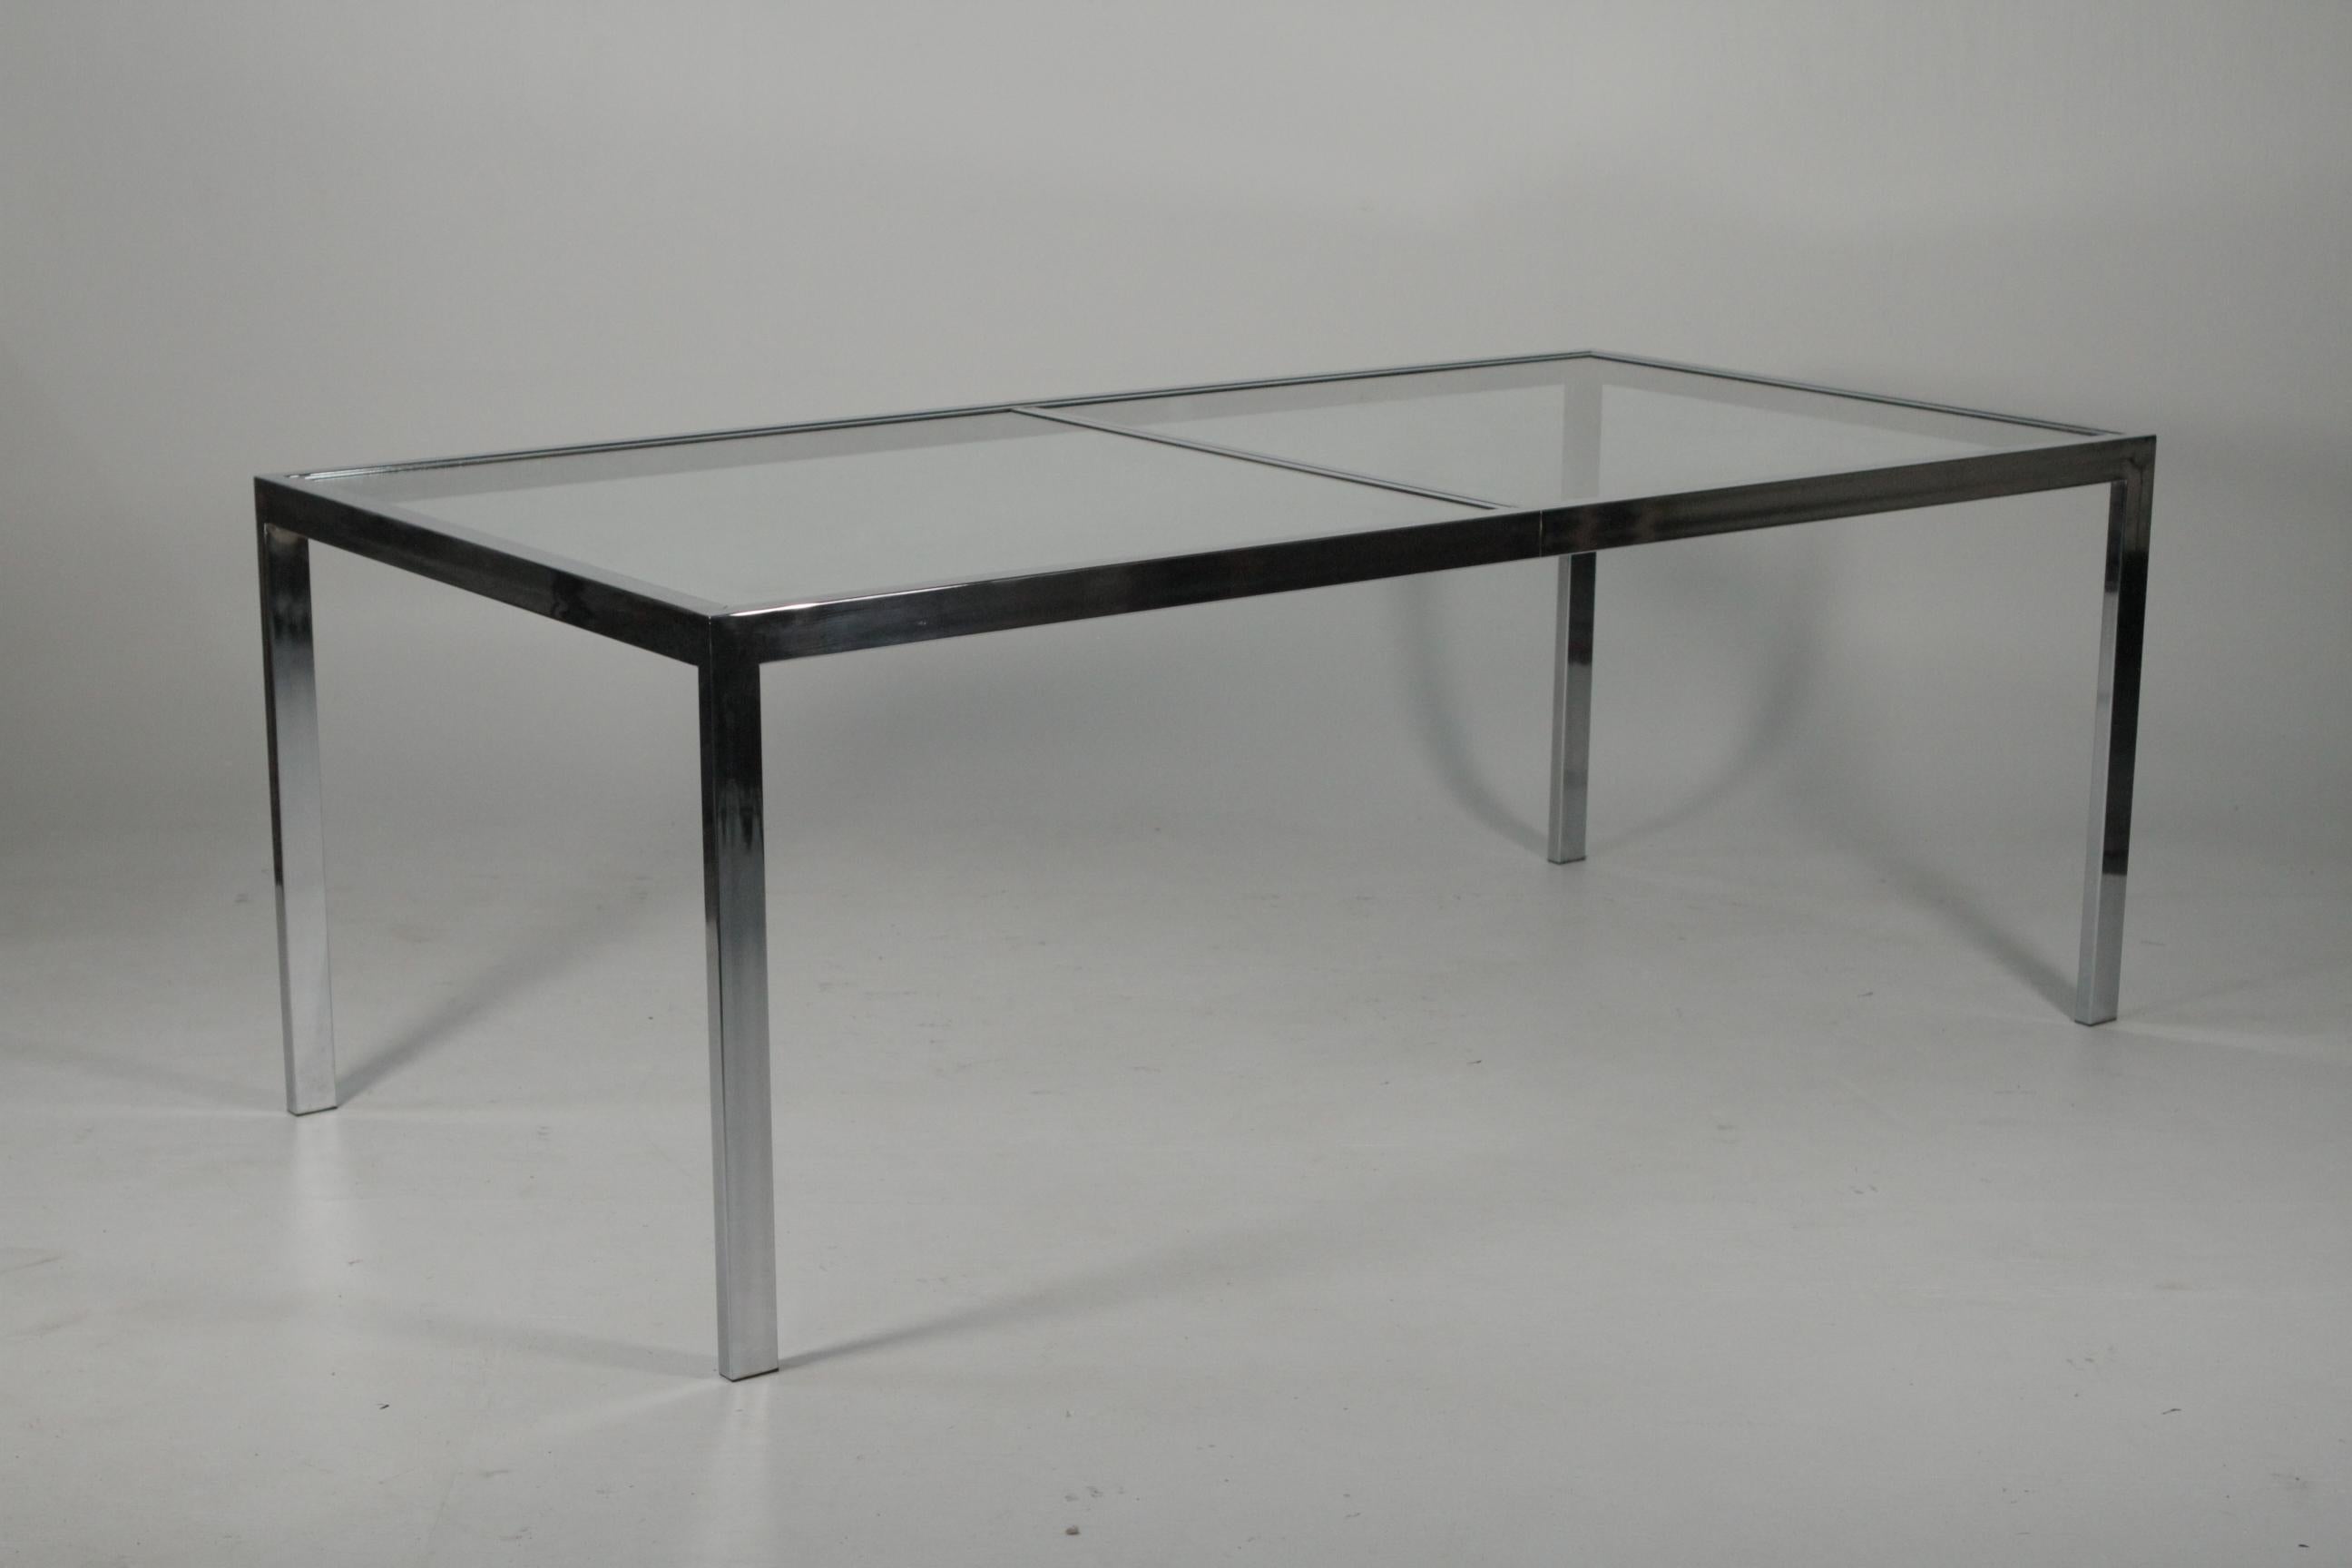 DIA Mid-Century Modern chrome and glass top dining room table.
Dimensions 38